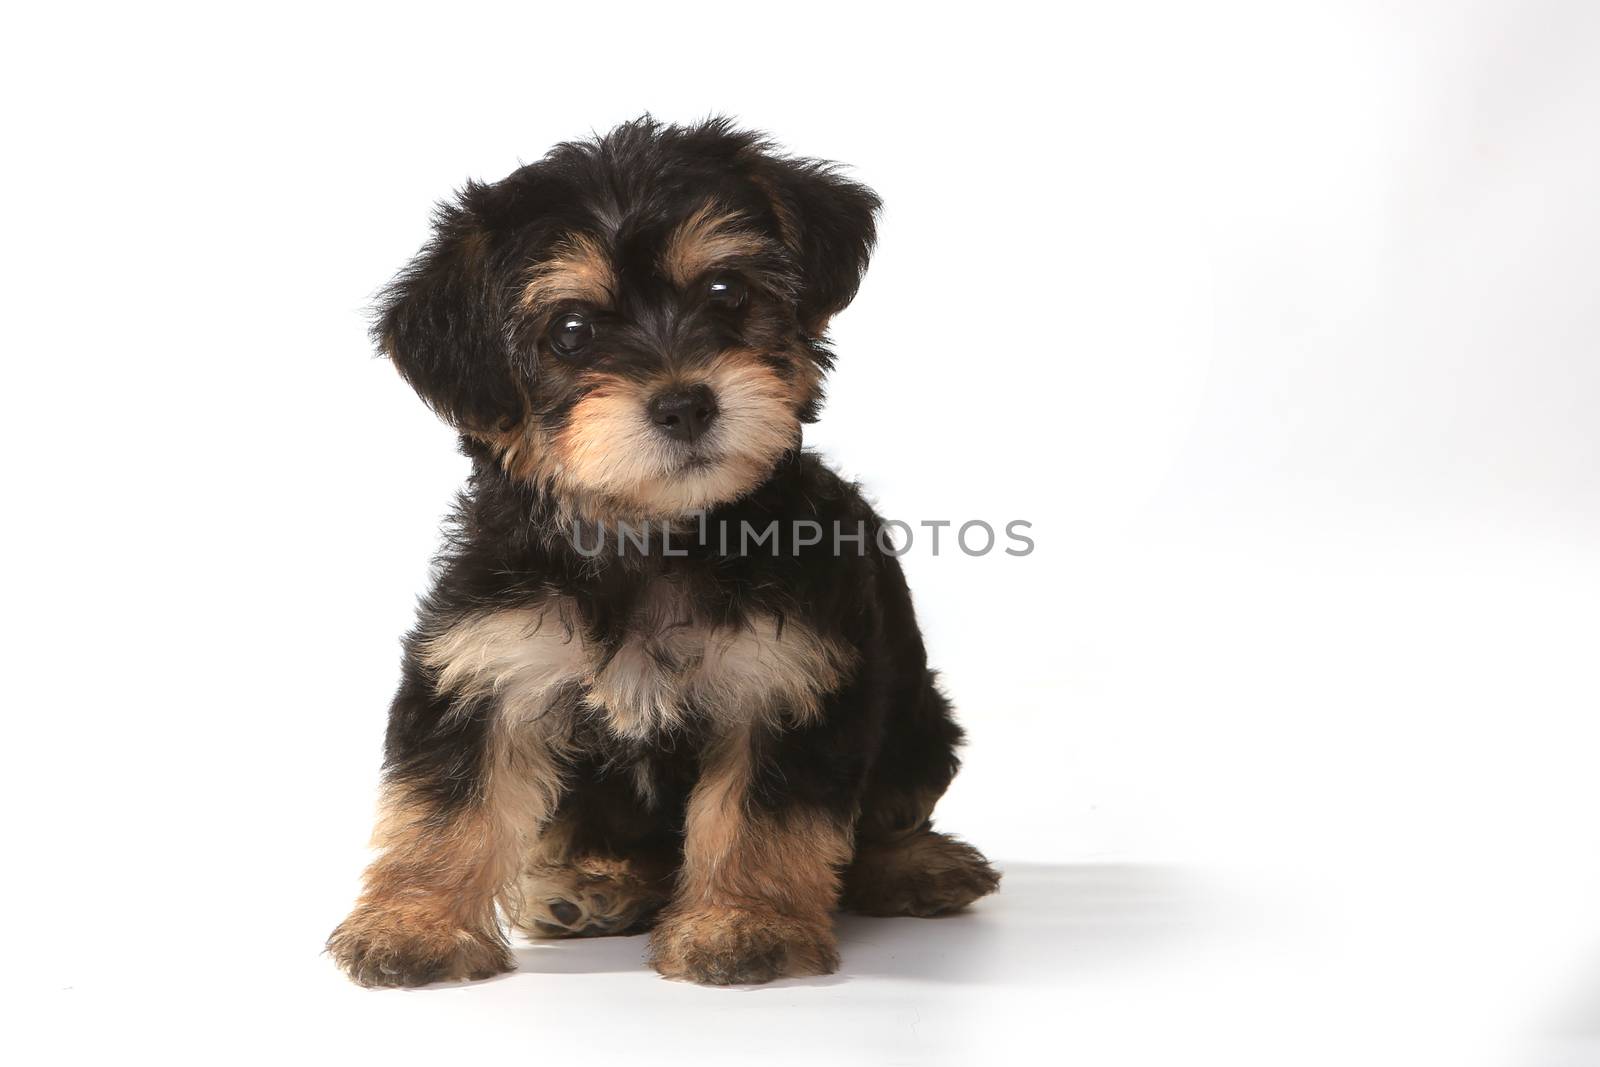 Miniature Teacup Yorkie Puppy on White Background